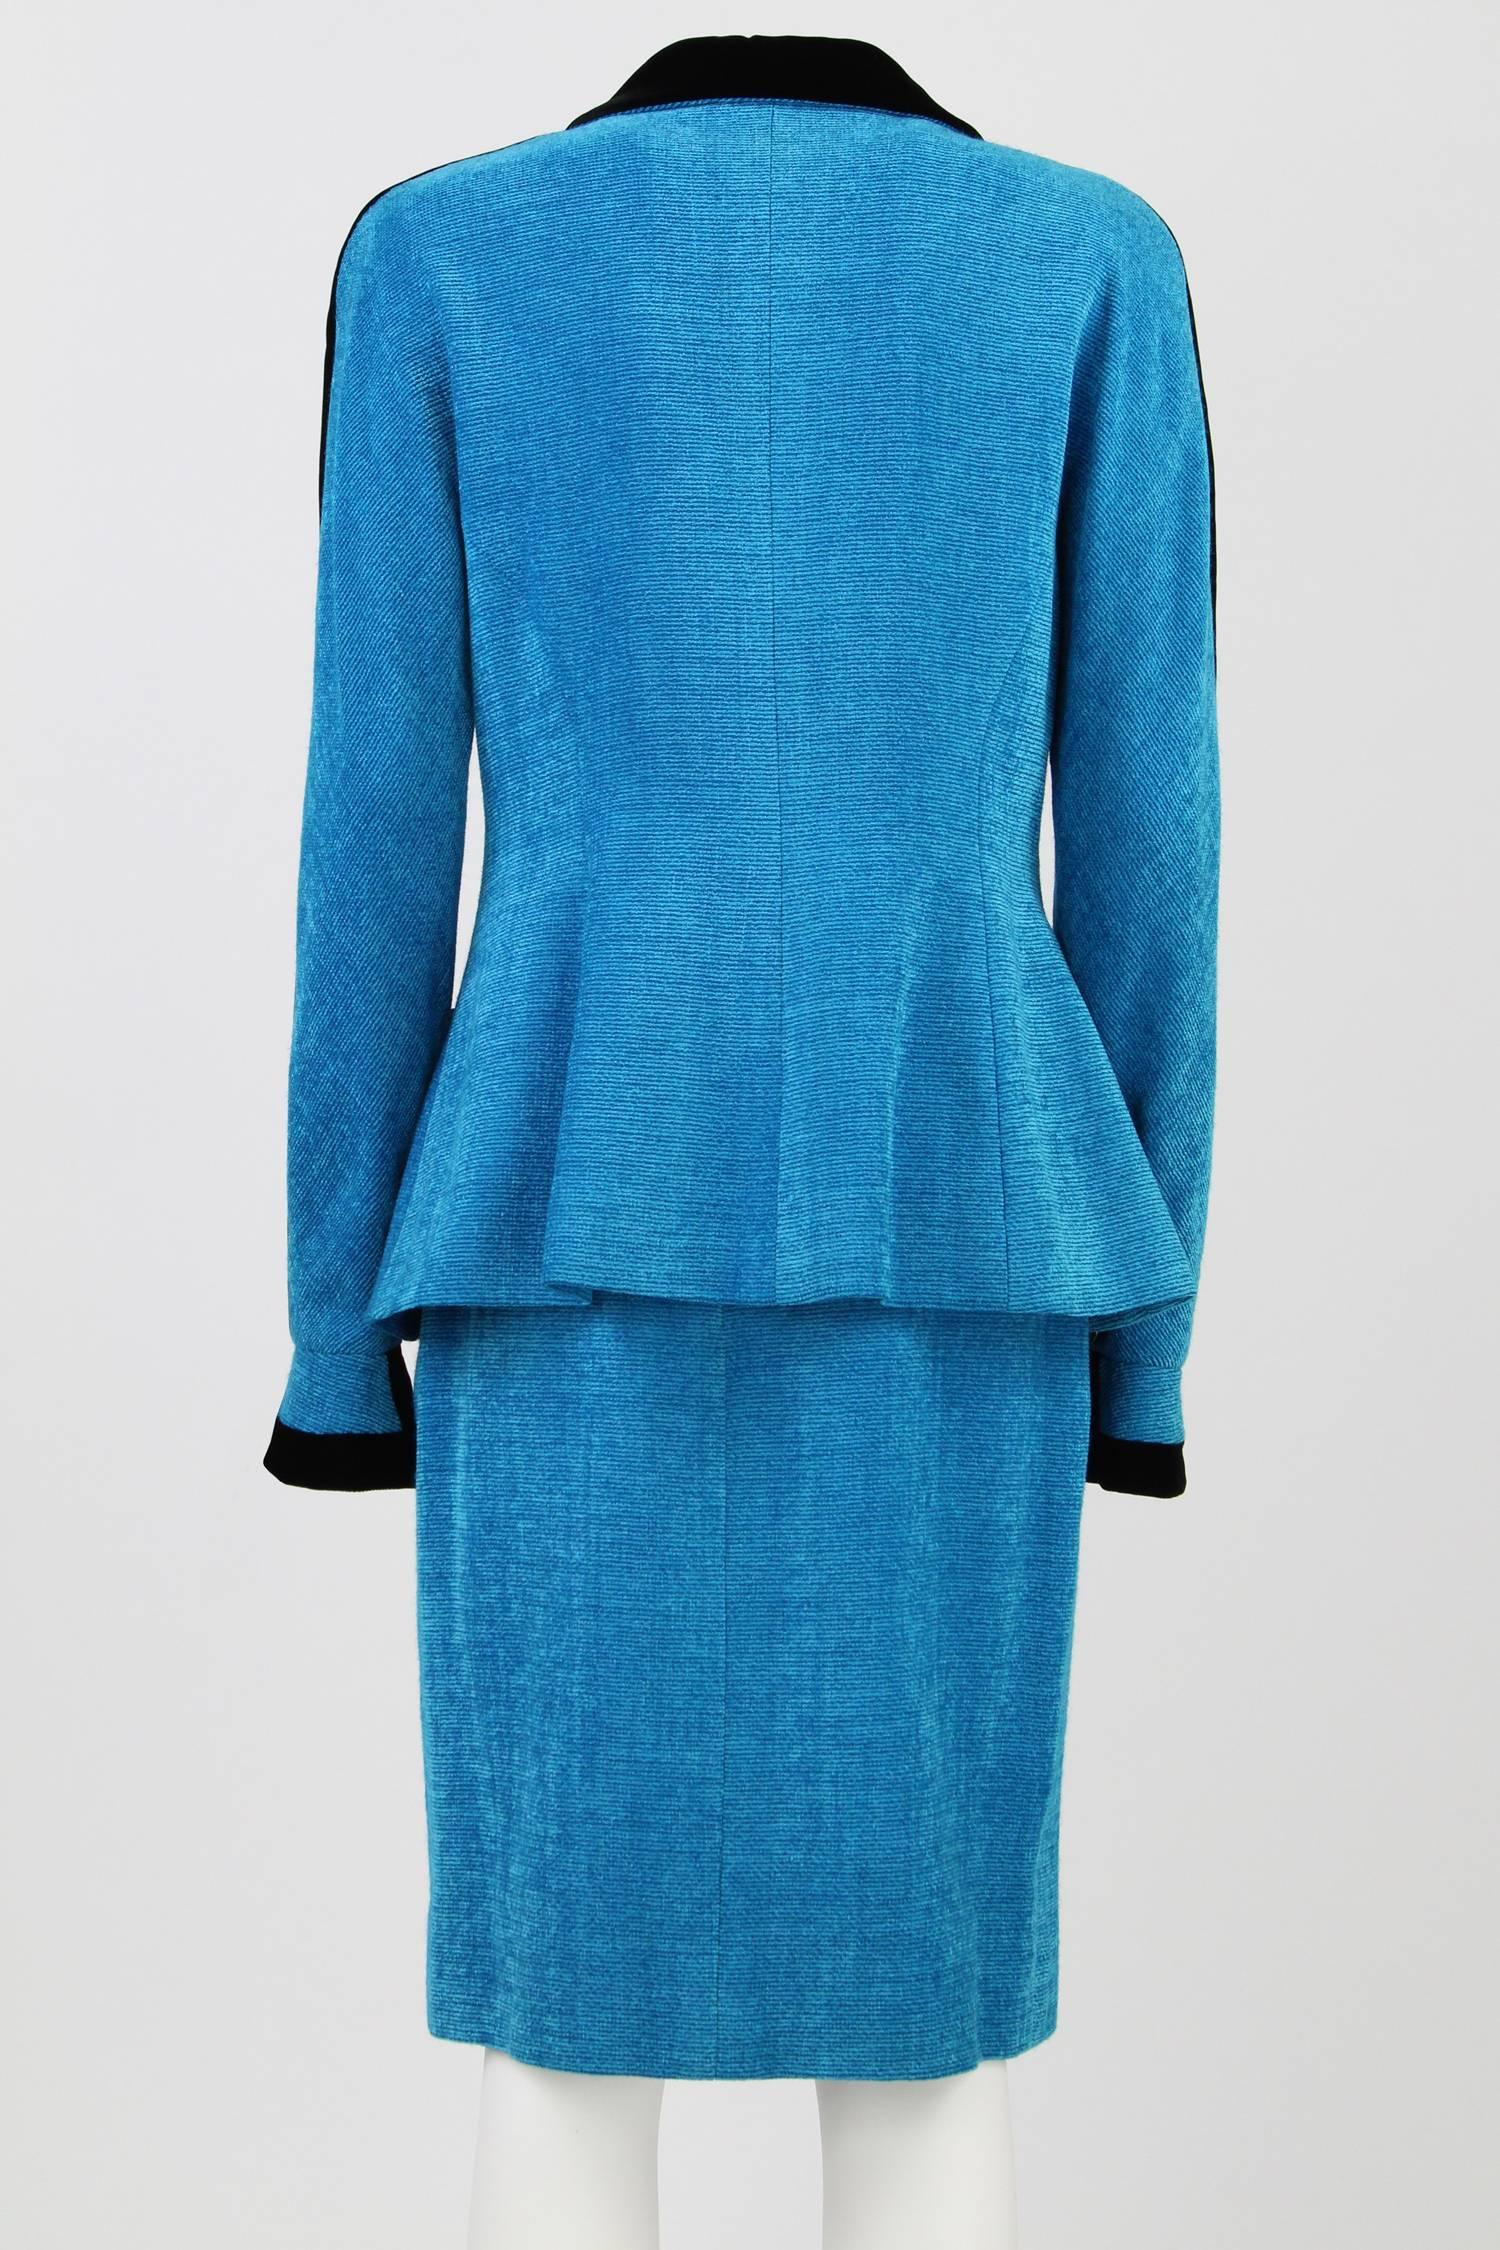 Classy blue skirt suit by Karl Lagerfeld. The jacket has black velvet trimmings,  two front pockets and raglan cut sleeves. 
Wool and rayon blend.
It is kept in very good conditions.
Size 42 FR.

Measurements.
Jacket: 70 cm (length) x 46